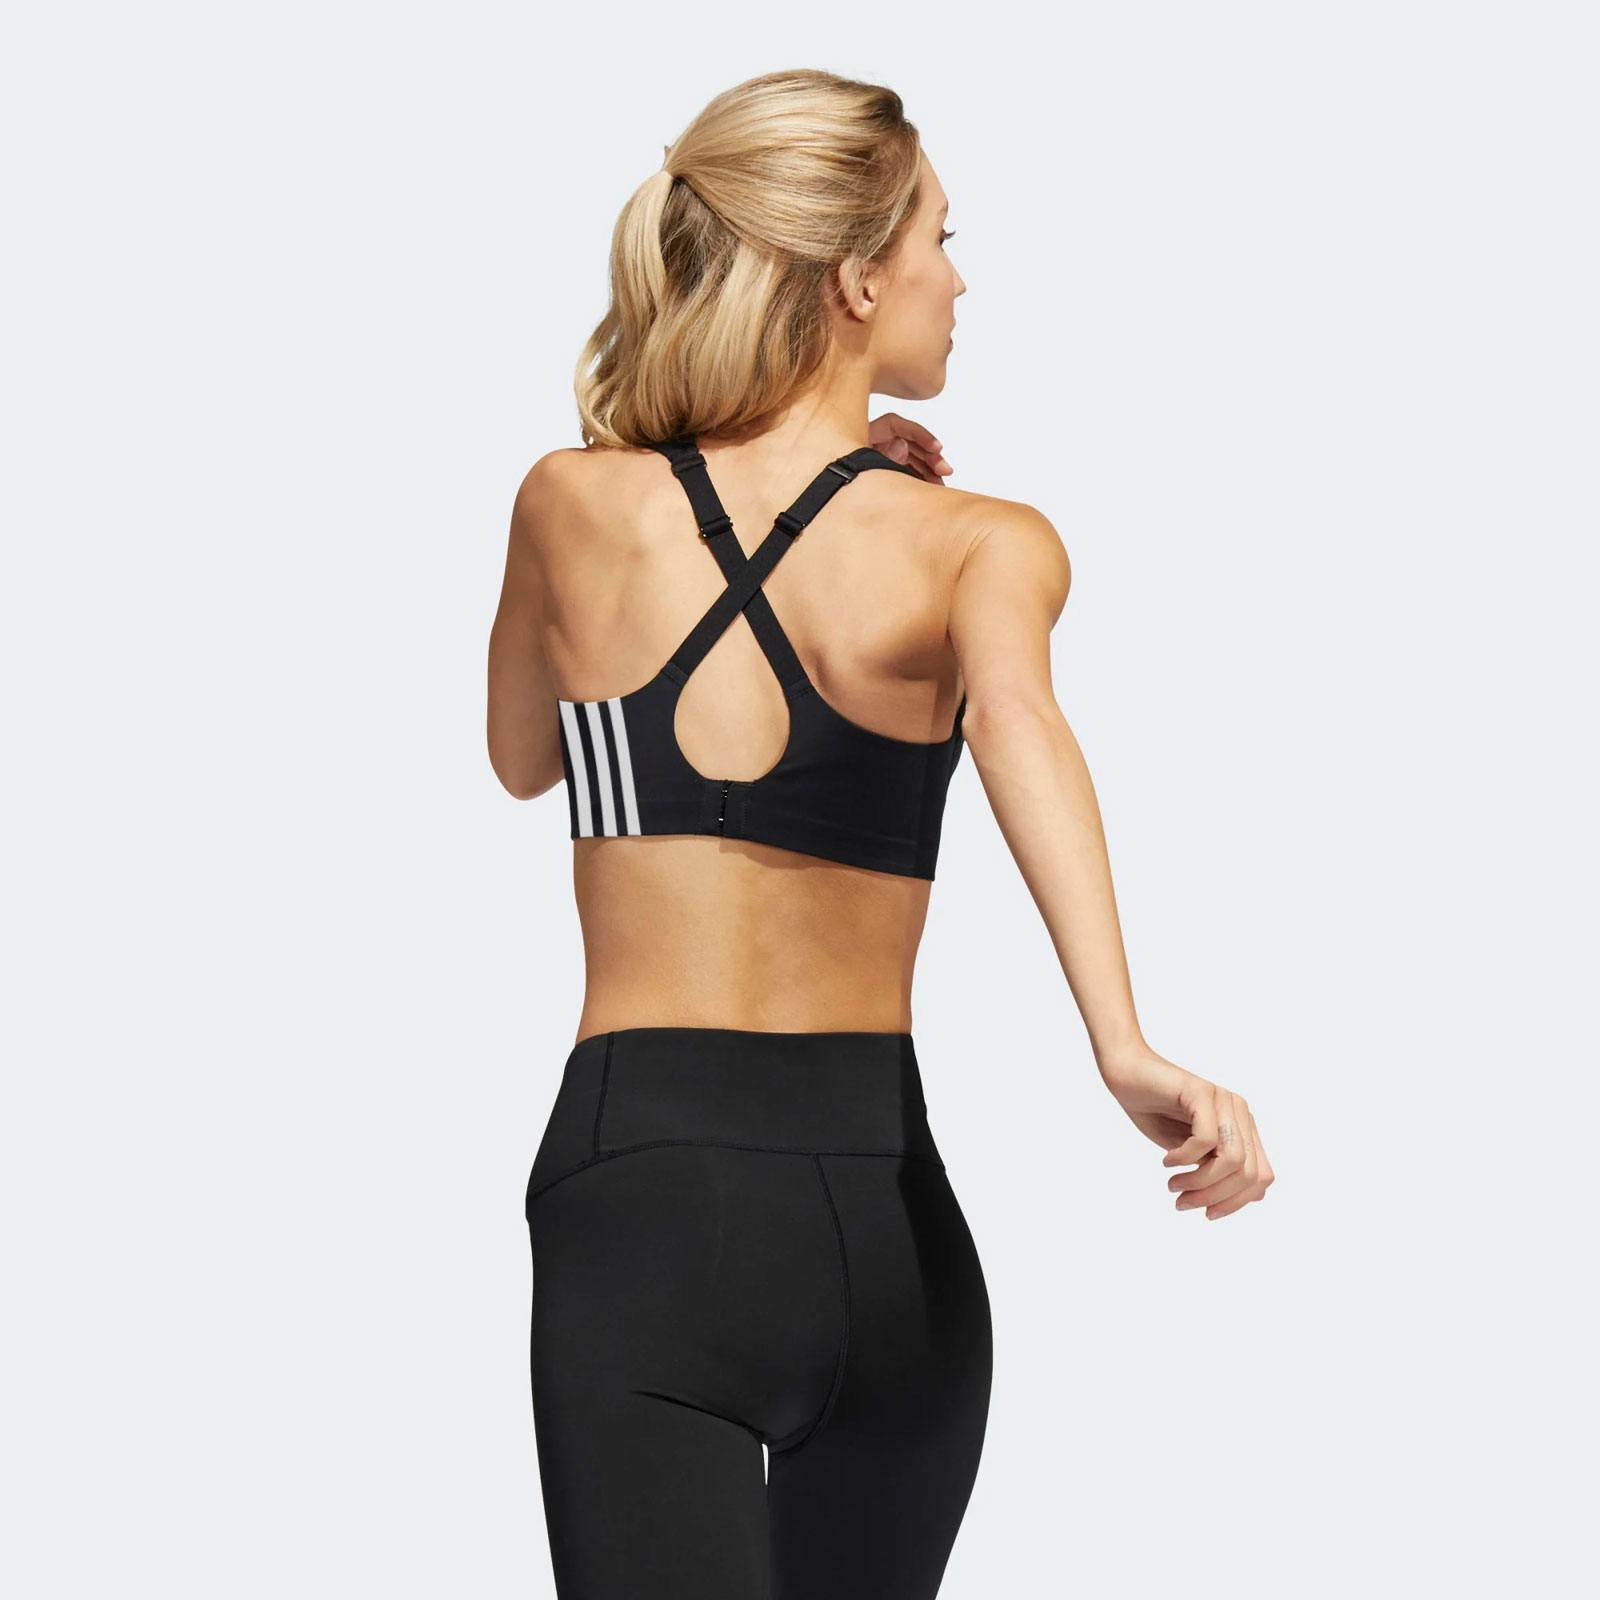 Women's Clothing - adidas TLRD Impact Training High-Support Bra - White